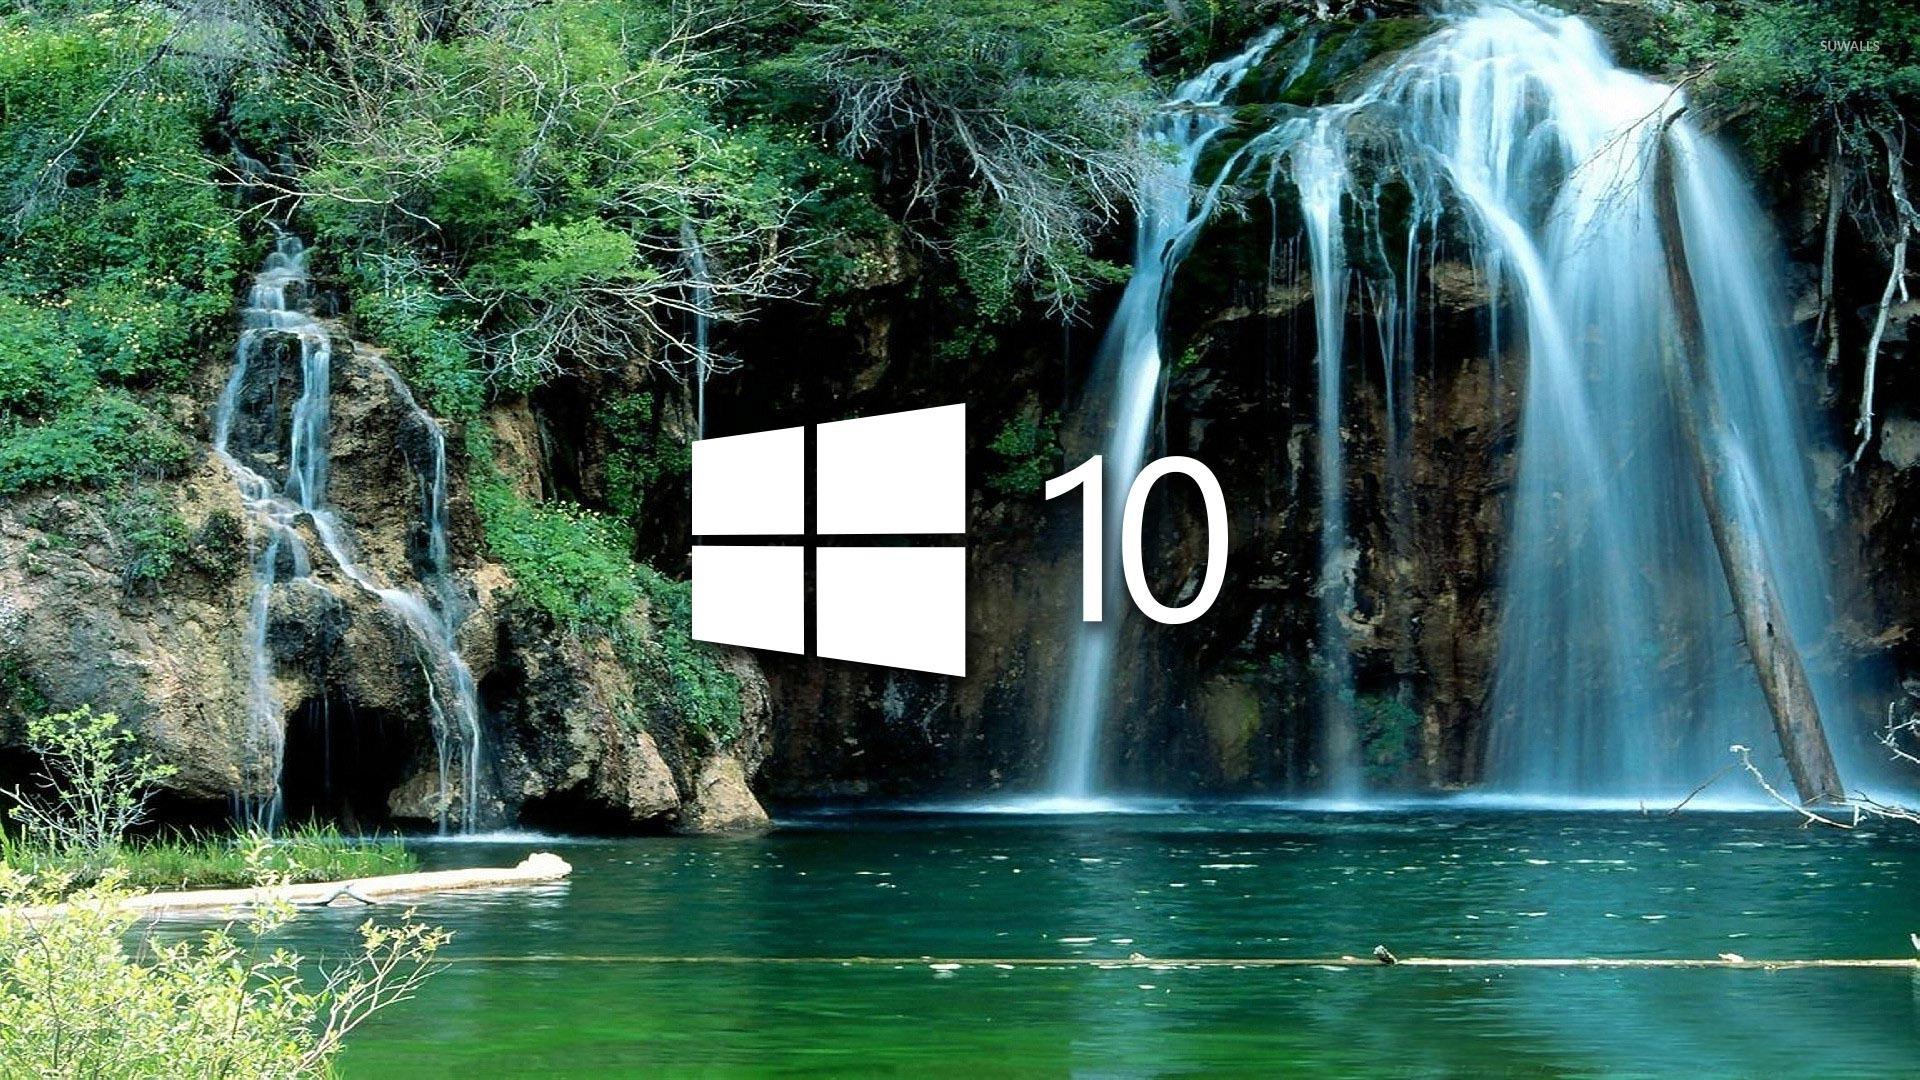 Windows 10 over the waterfall simple logo wallpaper - Computer